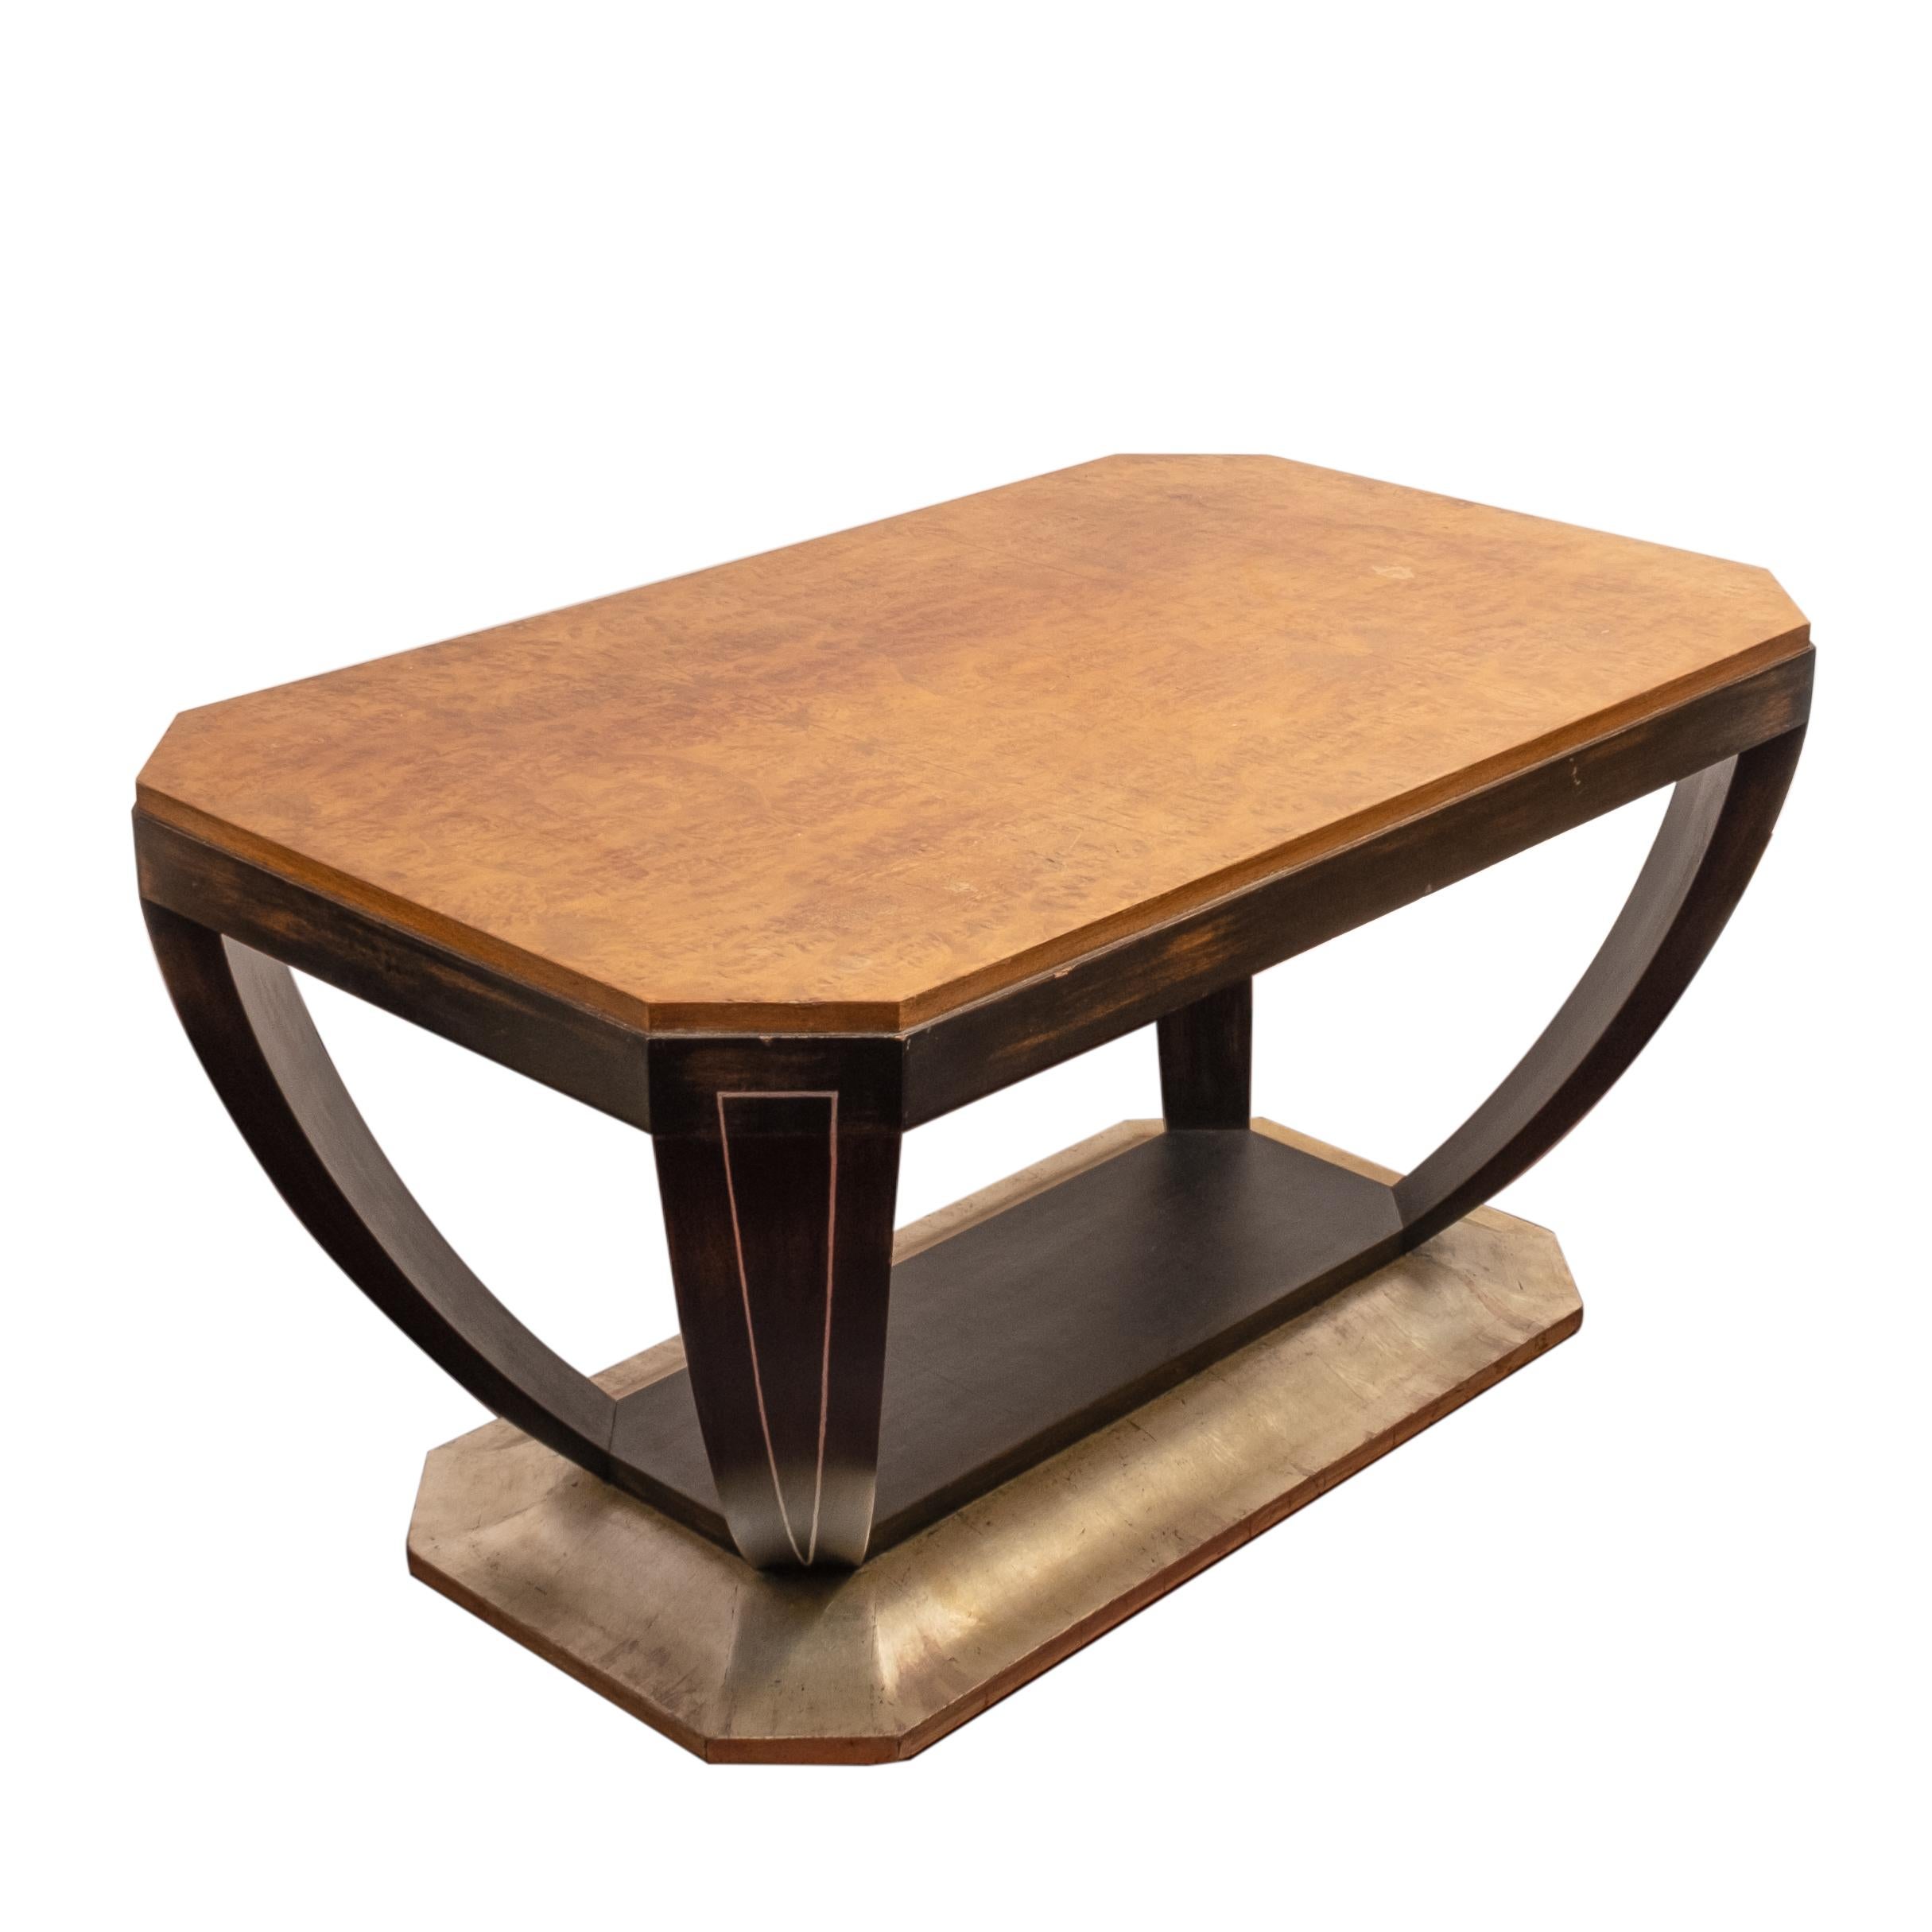 Art deco low table having a burled elm top, black stained legs, raised on a silver leafed base. Unmarked.